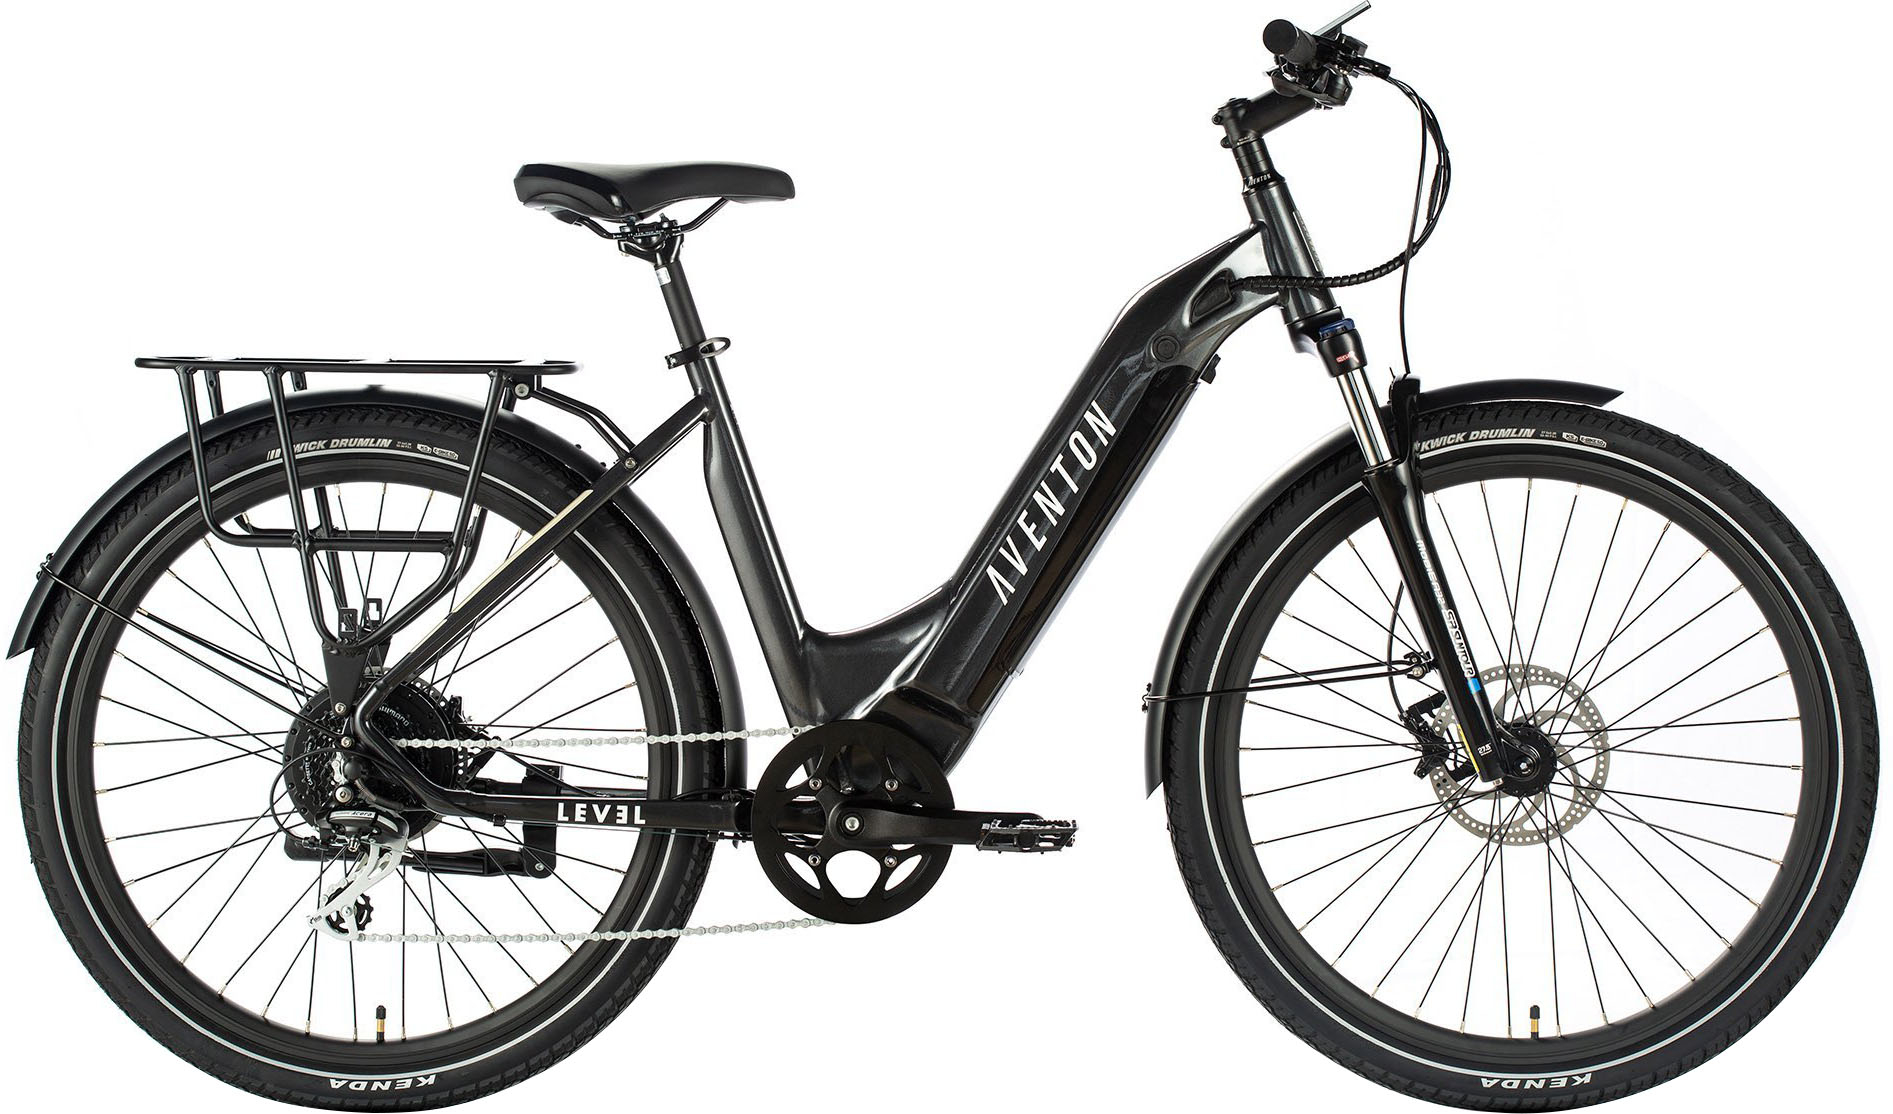 Angle View: Aventon - Level Commuter Step-Through Ebike w/ 40 mile Max Operating Range and 28 MPH Max Speed - Earth Grey